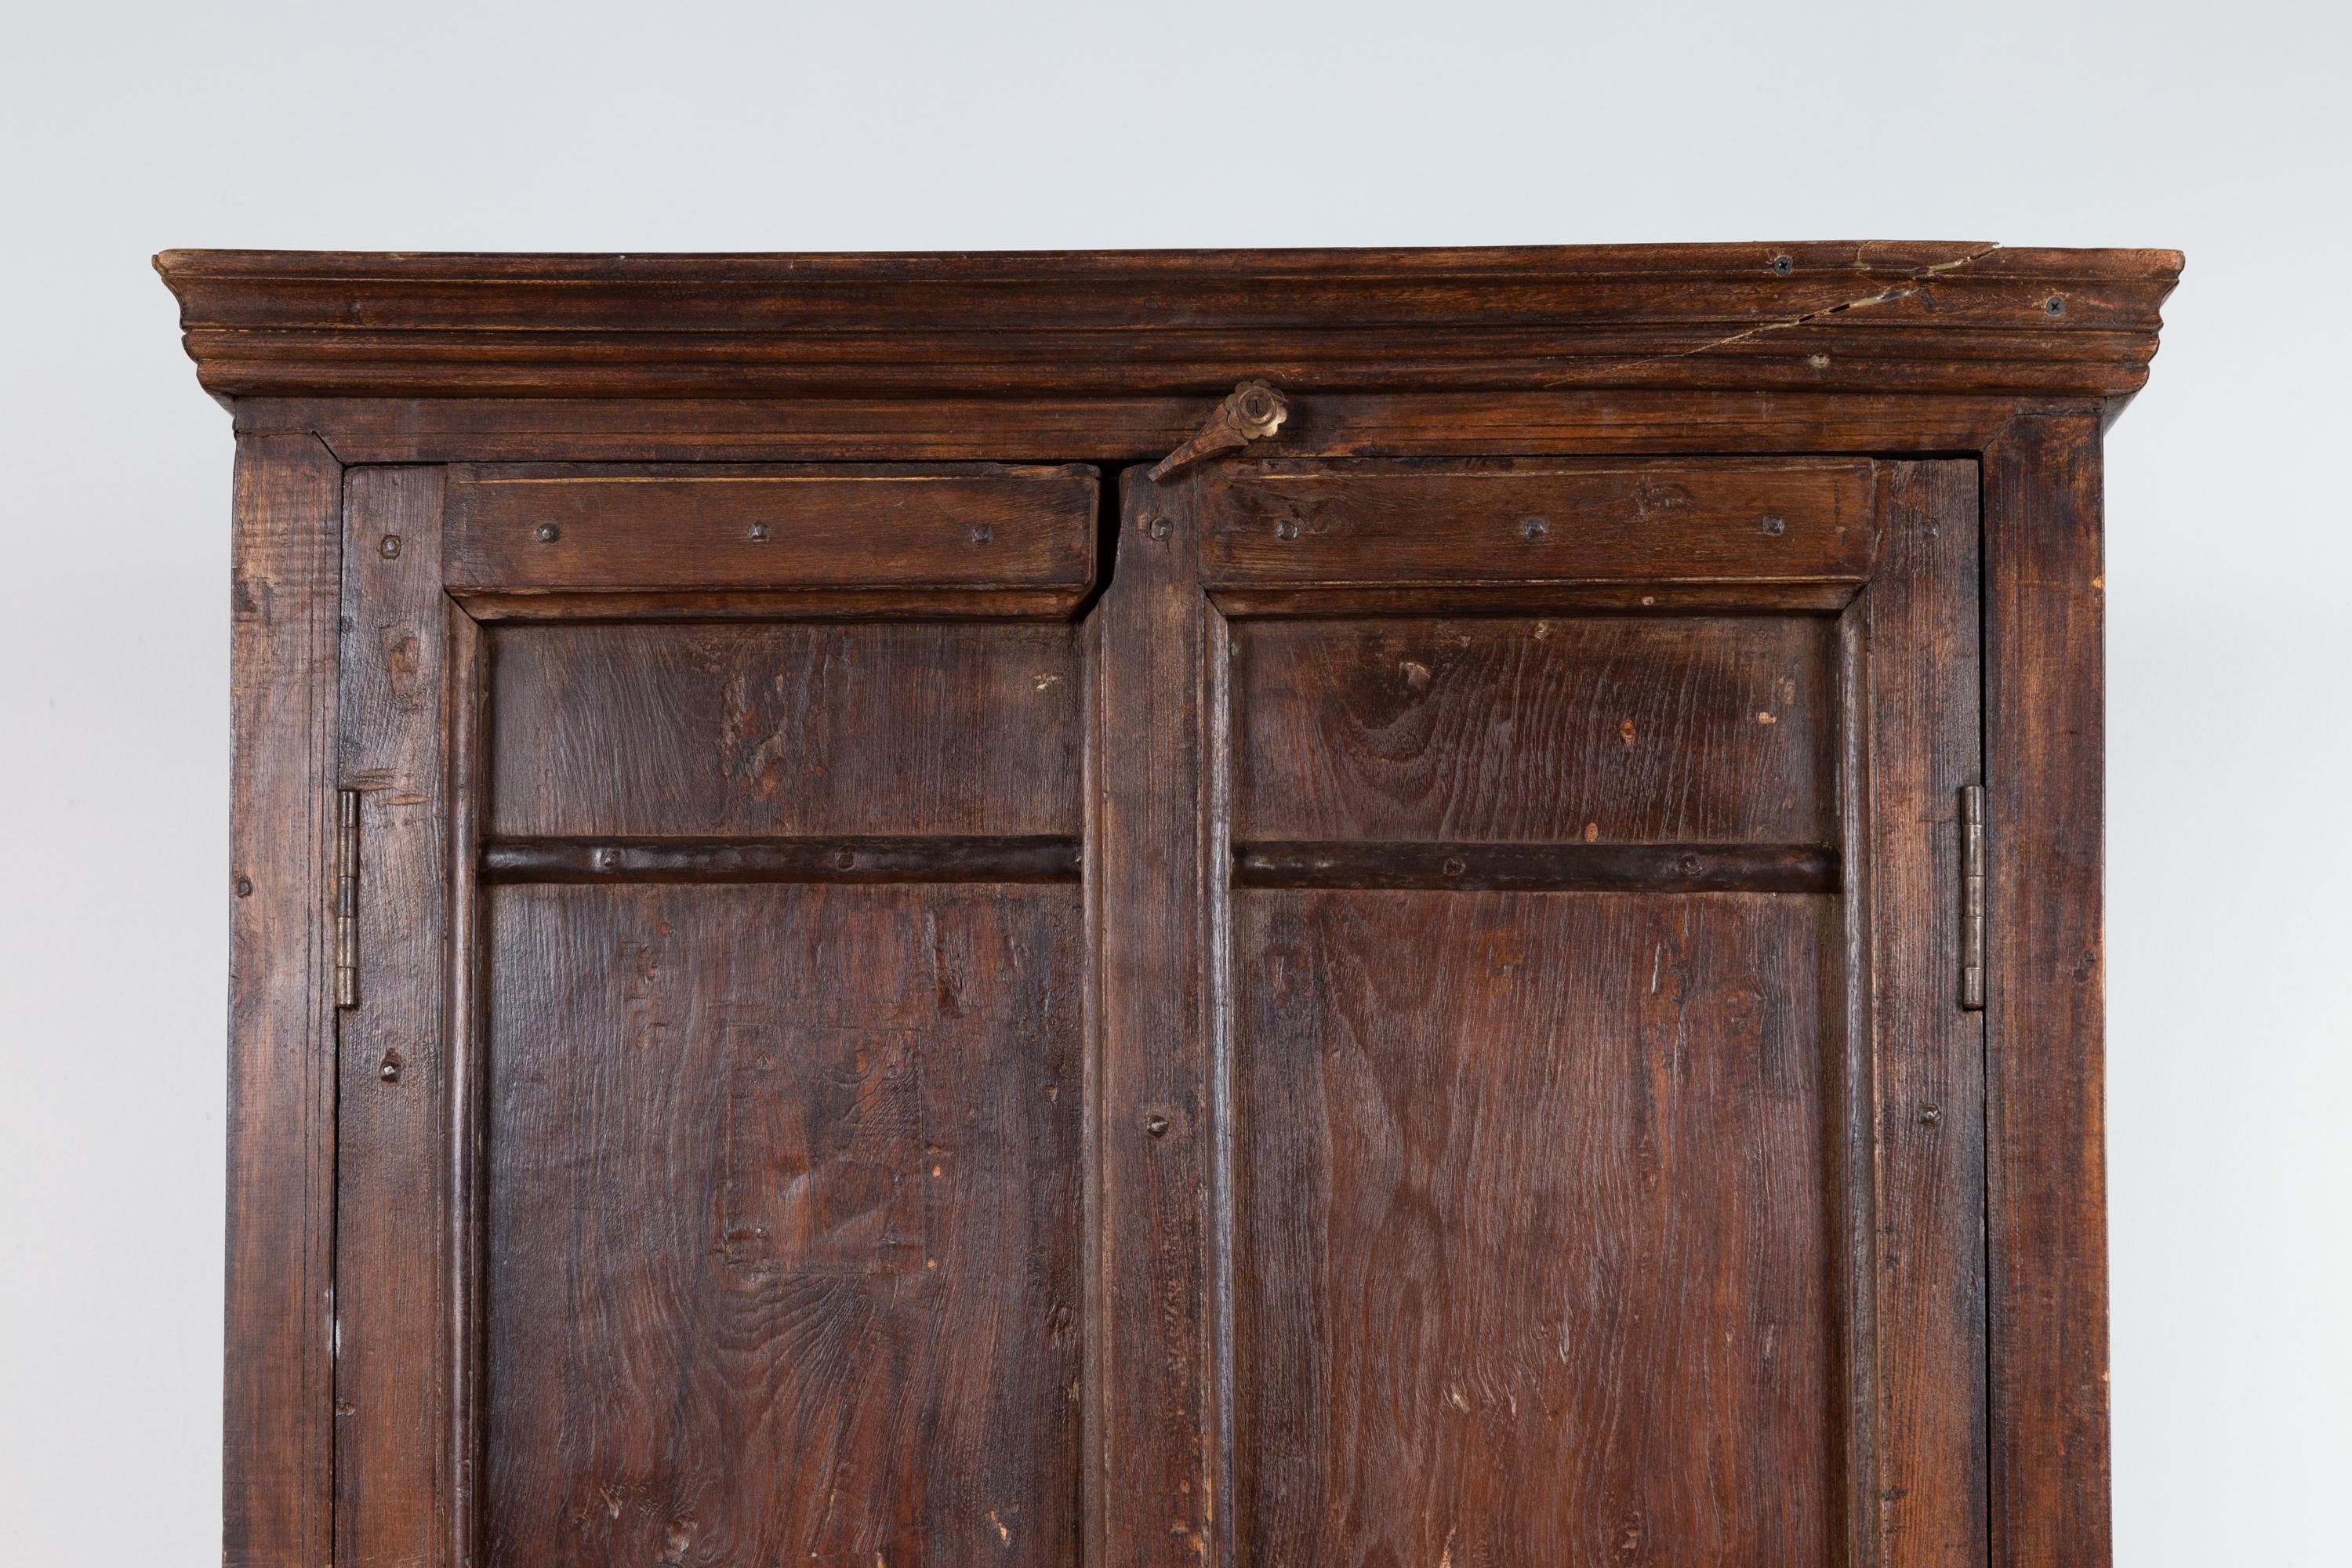 20th Century Indian Antique Wooden Armoire with Paneled Doors, Metal Braces and Aged Patina